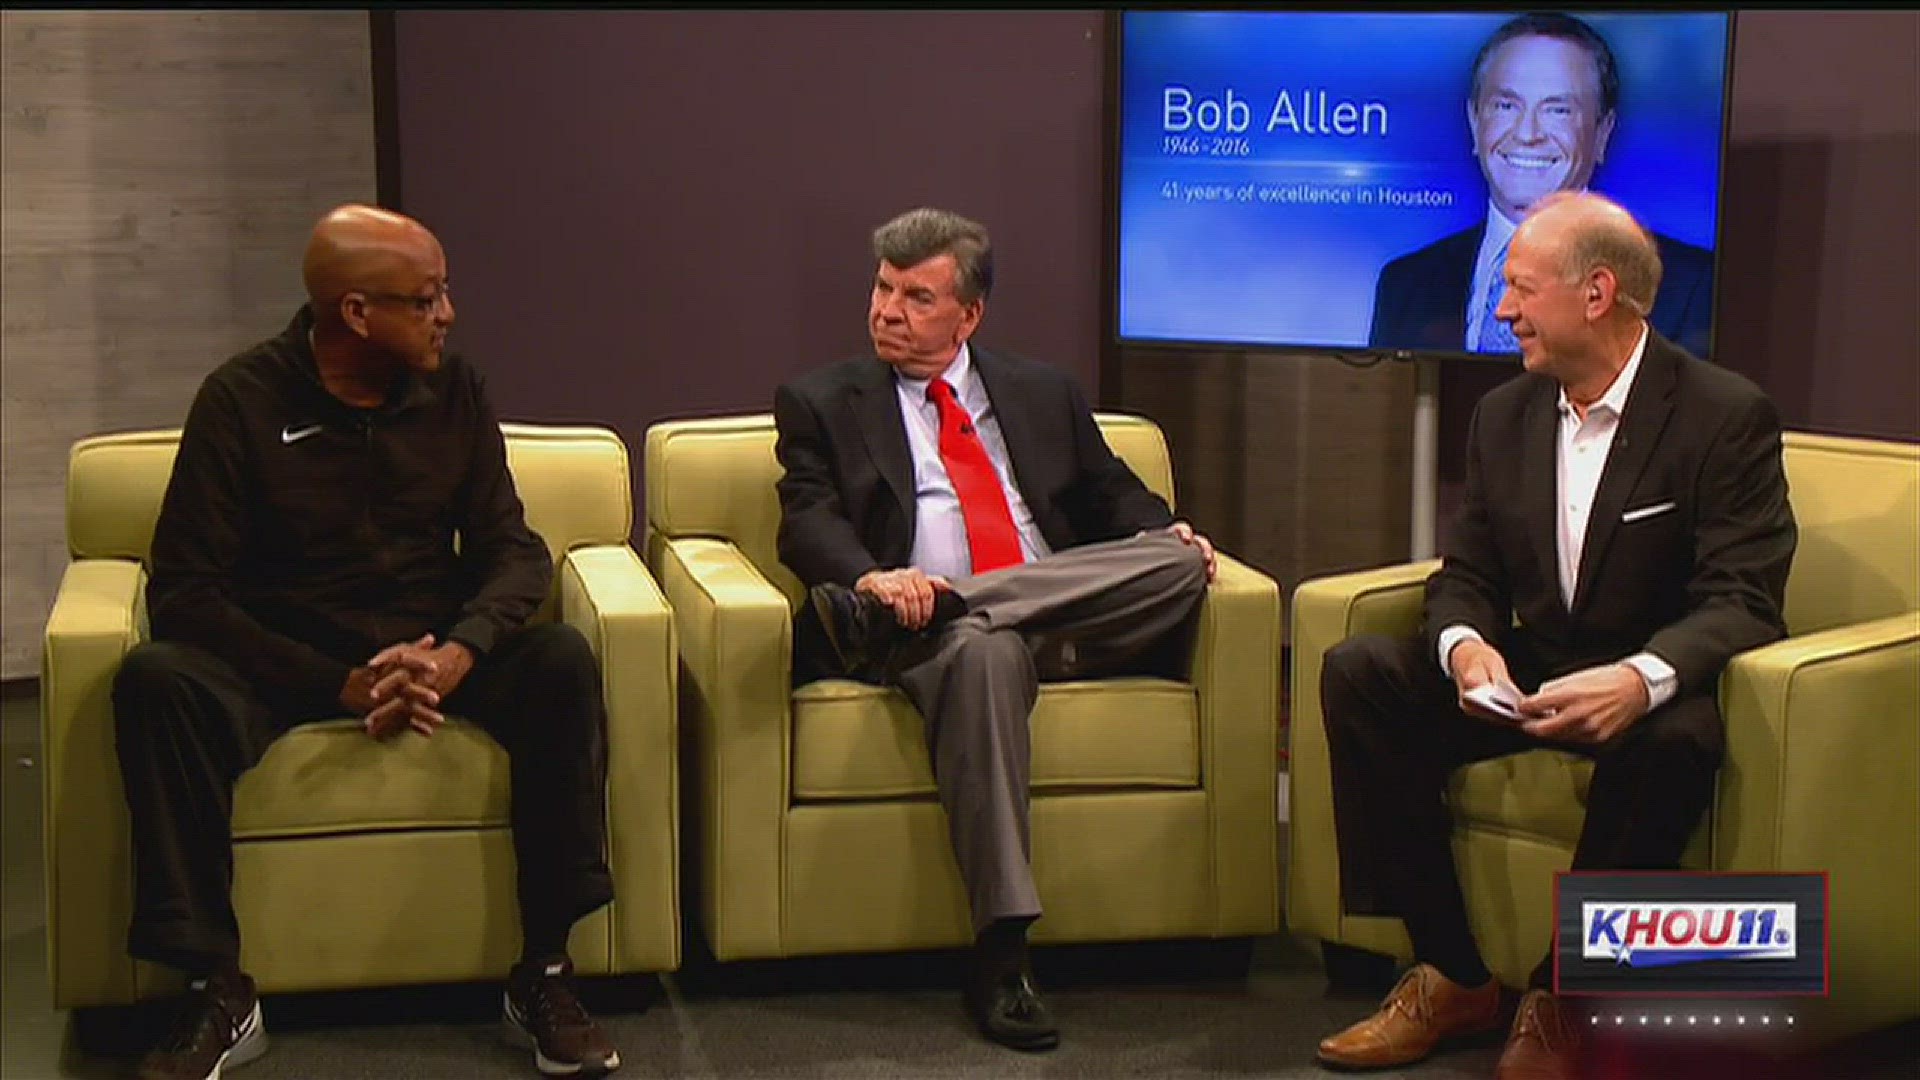 Former colleagues Ralph Cooper and Kenny Hand talk about working with Bob Allen for decades.